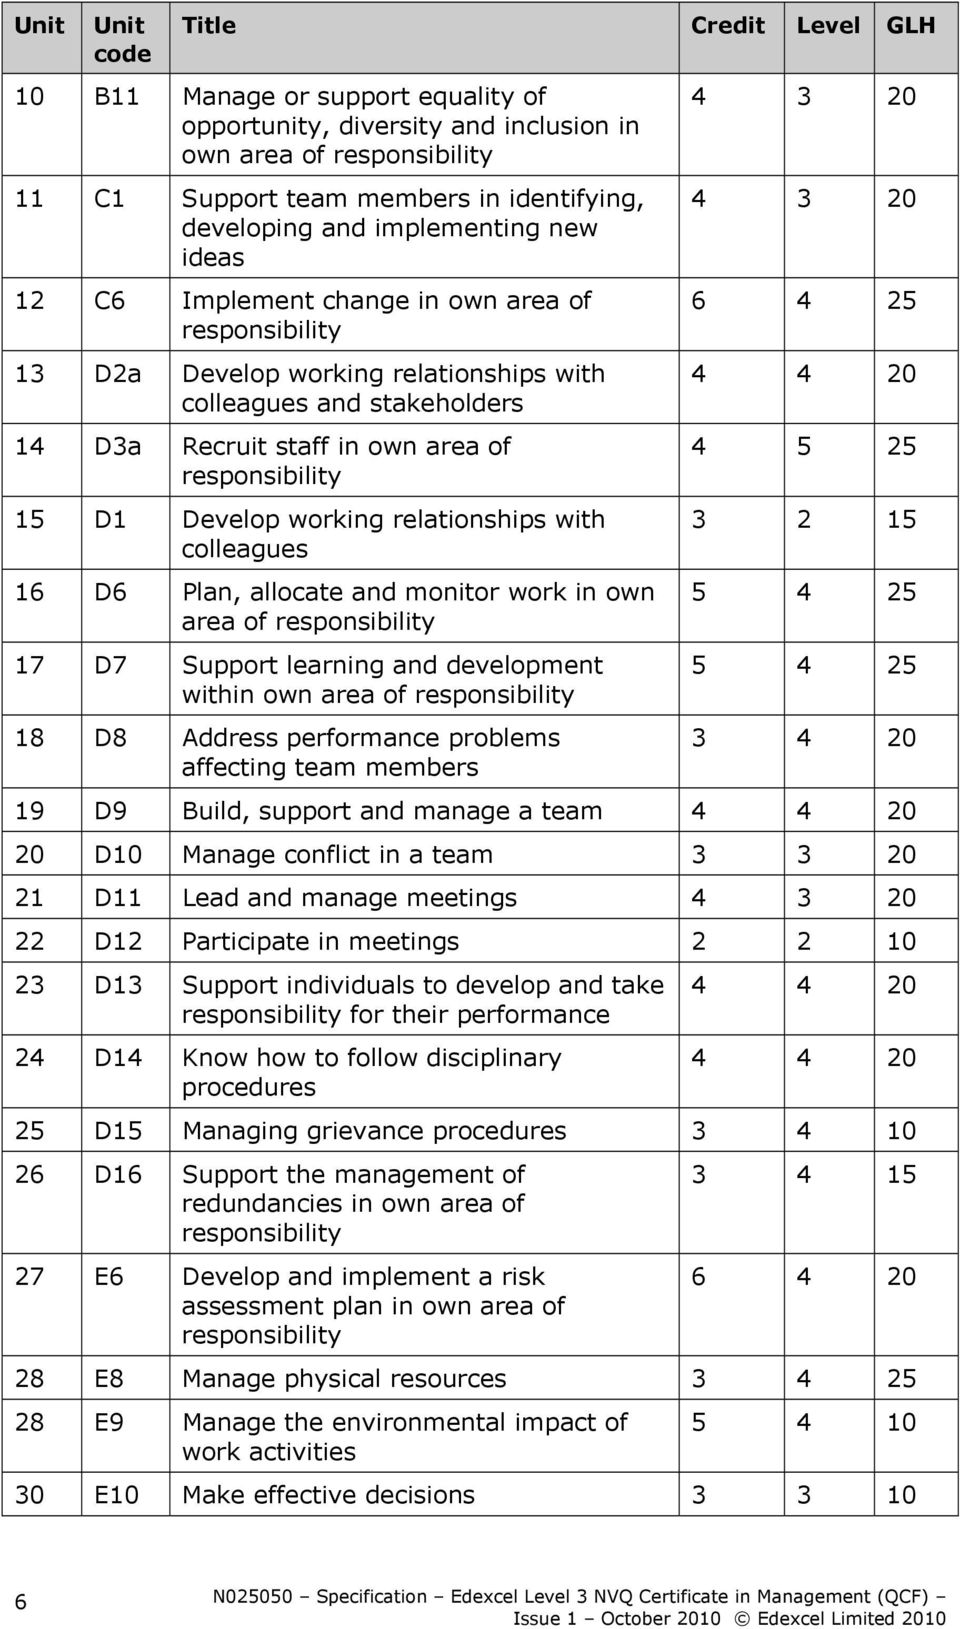 D1 Develop working relationships with colleagues 16 D6 Plan, allocate and monitor work in own area of responsibility 17 D7 Support learning and development within own area of responsibility 18 D8